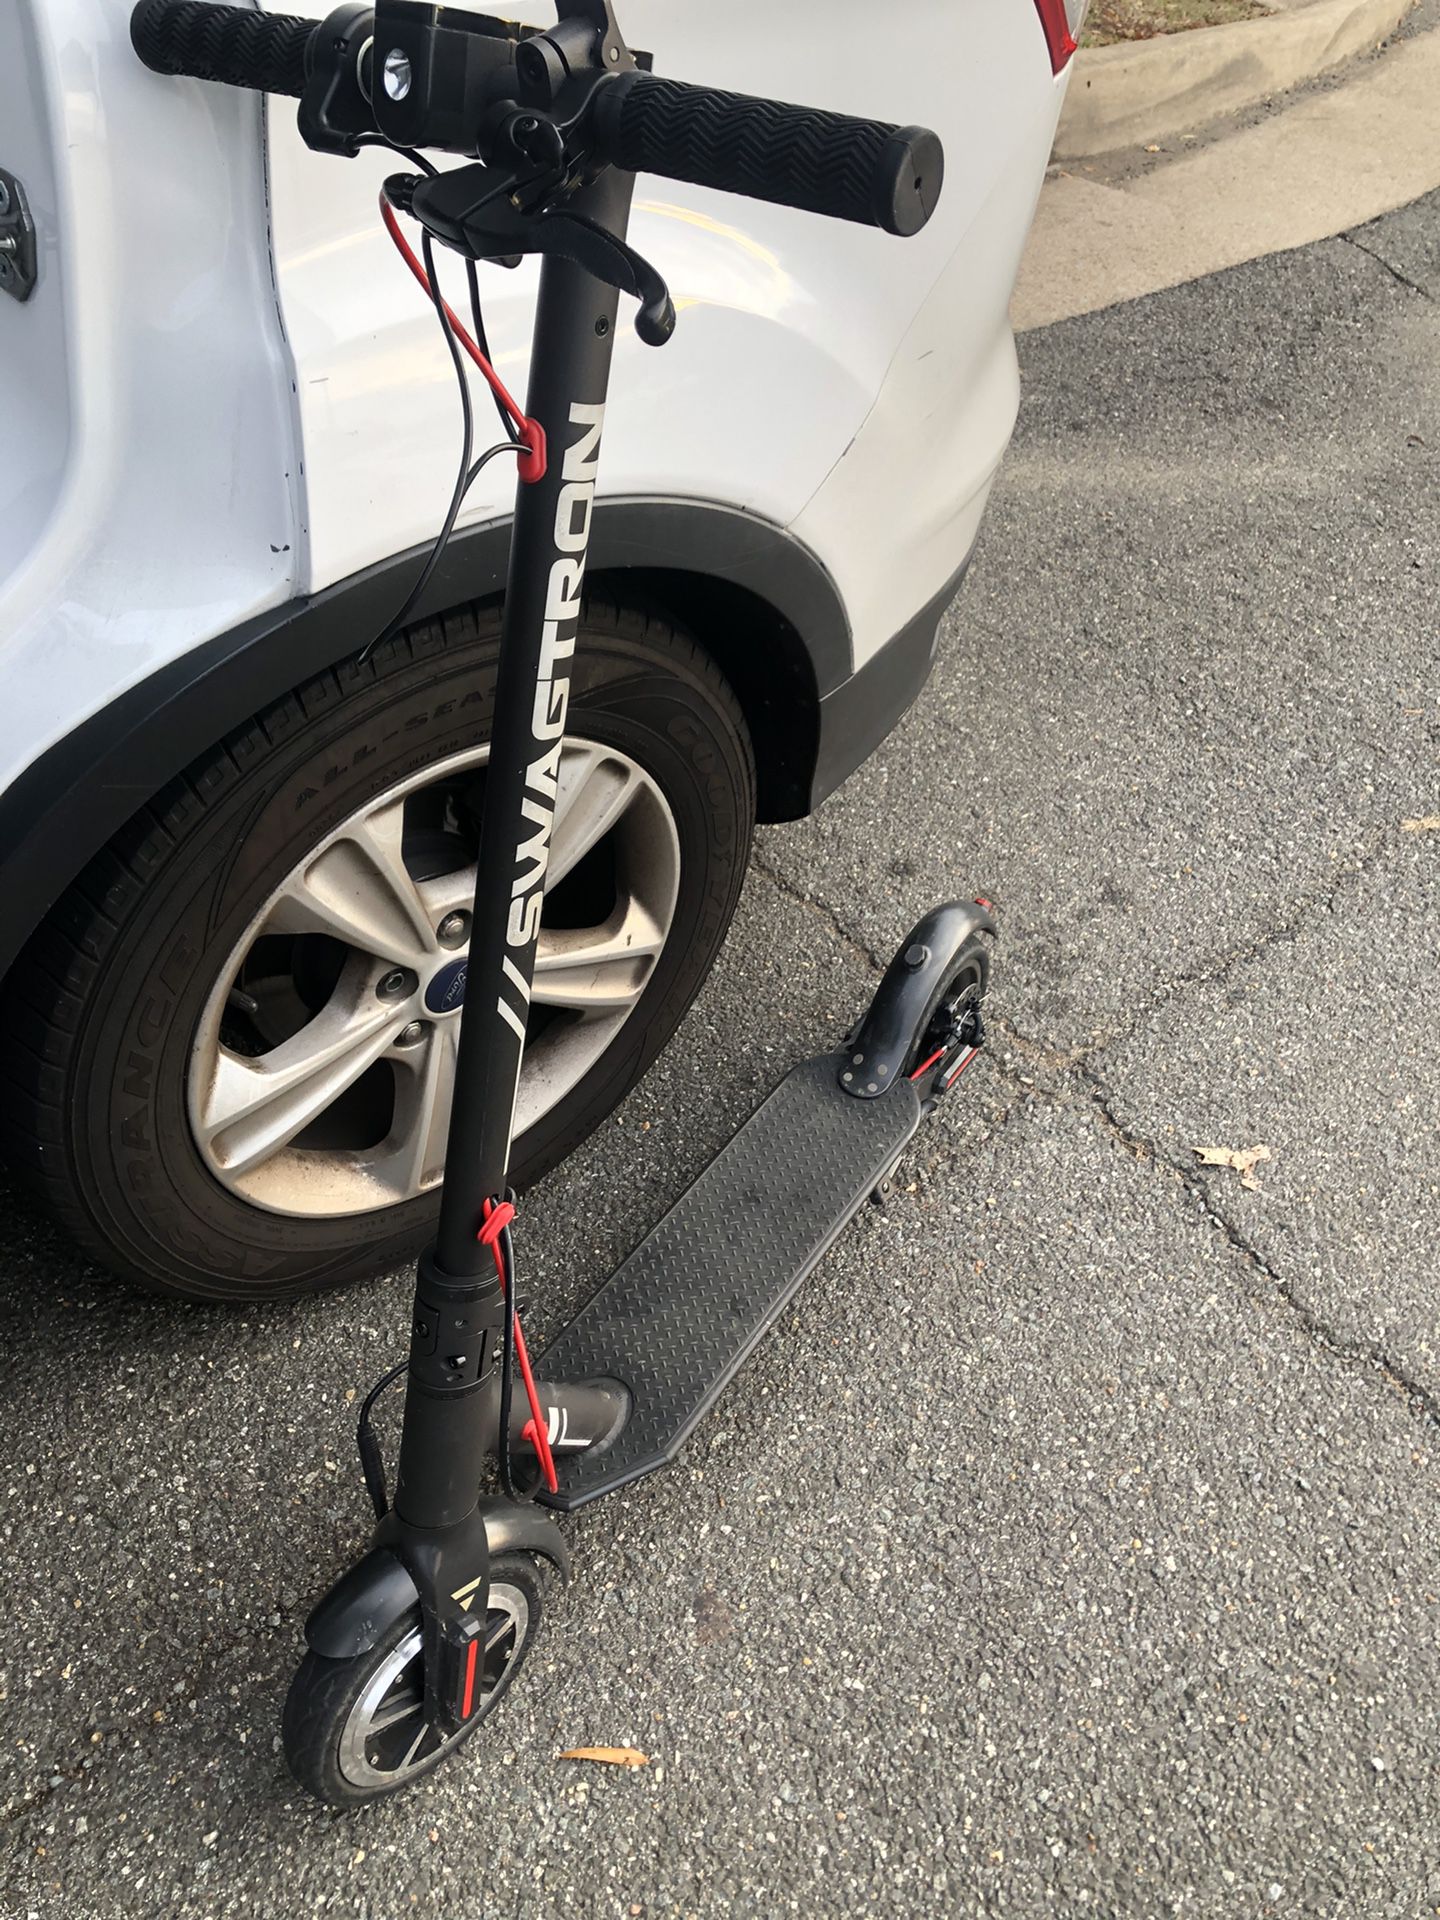 Swaggtron electric scooter